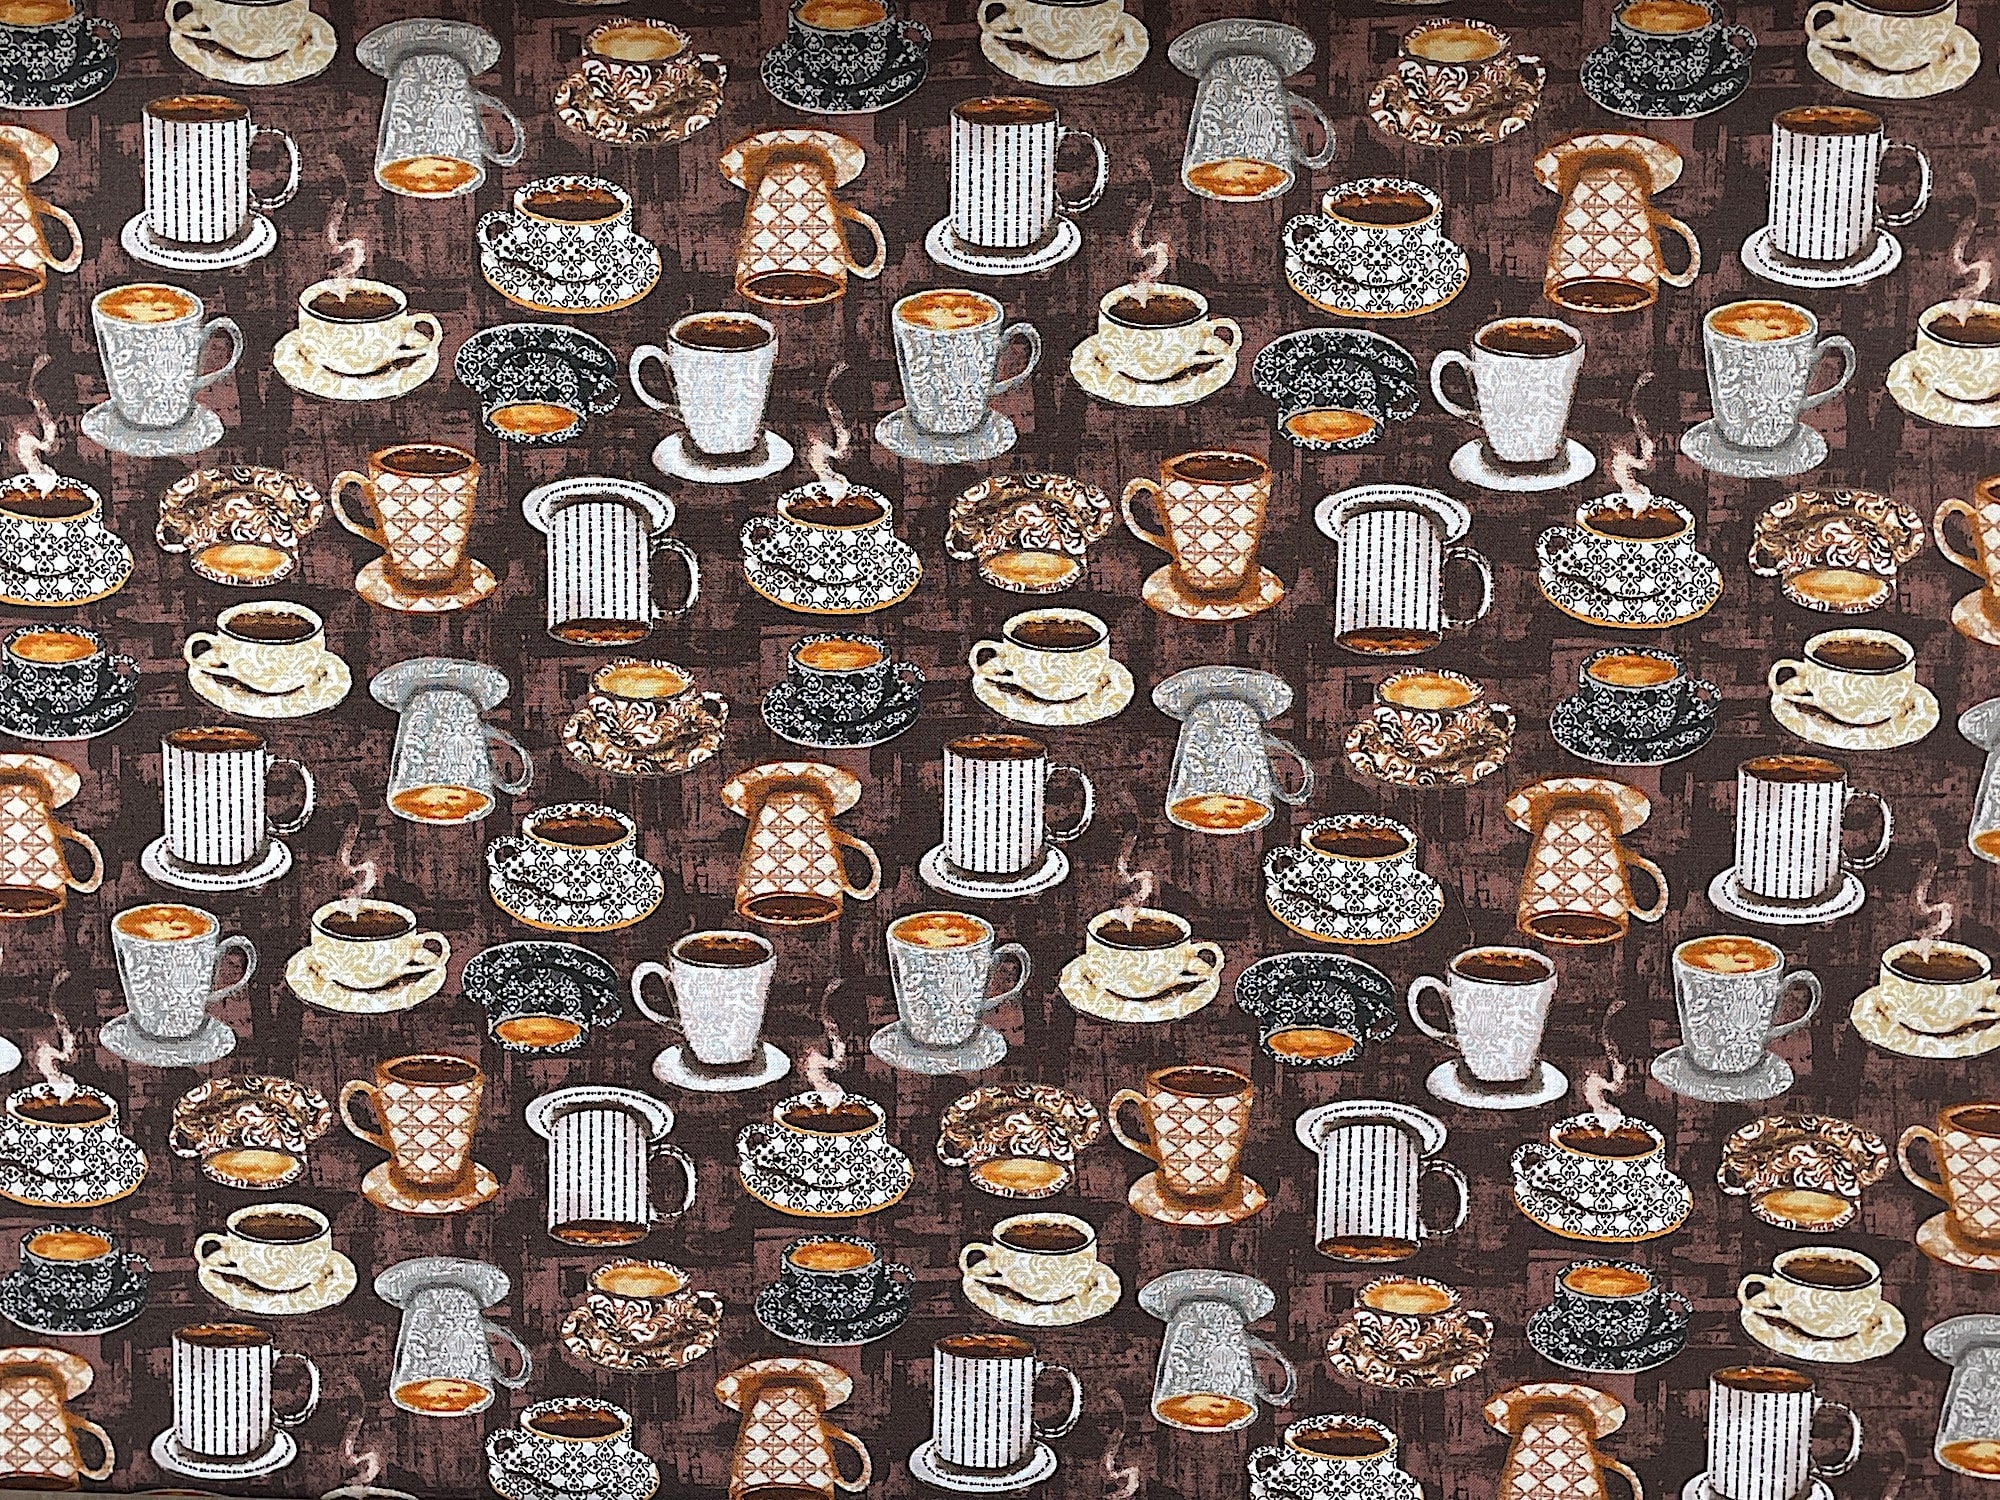 This fabric is part of the Coffee Connoisseur collection by Jean Plout. This brown fabric is covered with coffee cups and mugs filled with coffee sitting on saucers